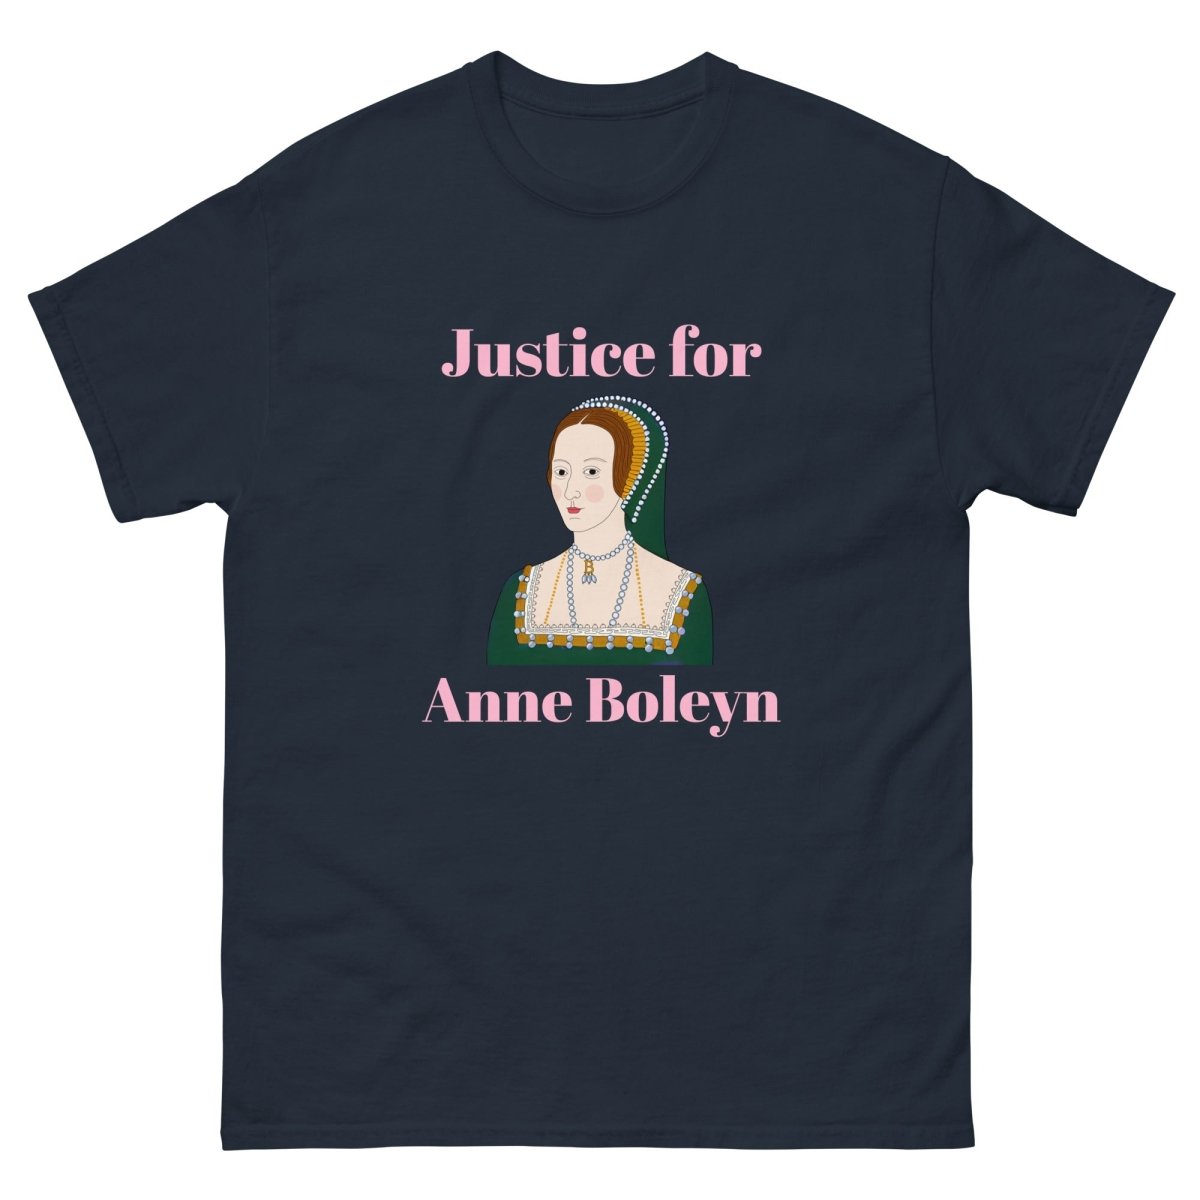 Justice for Anne Boleyn tee - One Small Step History